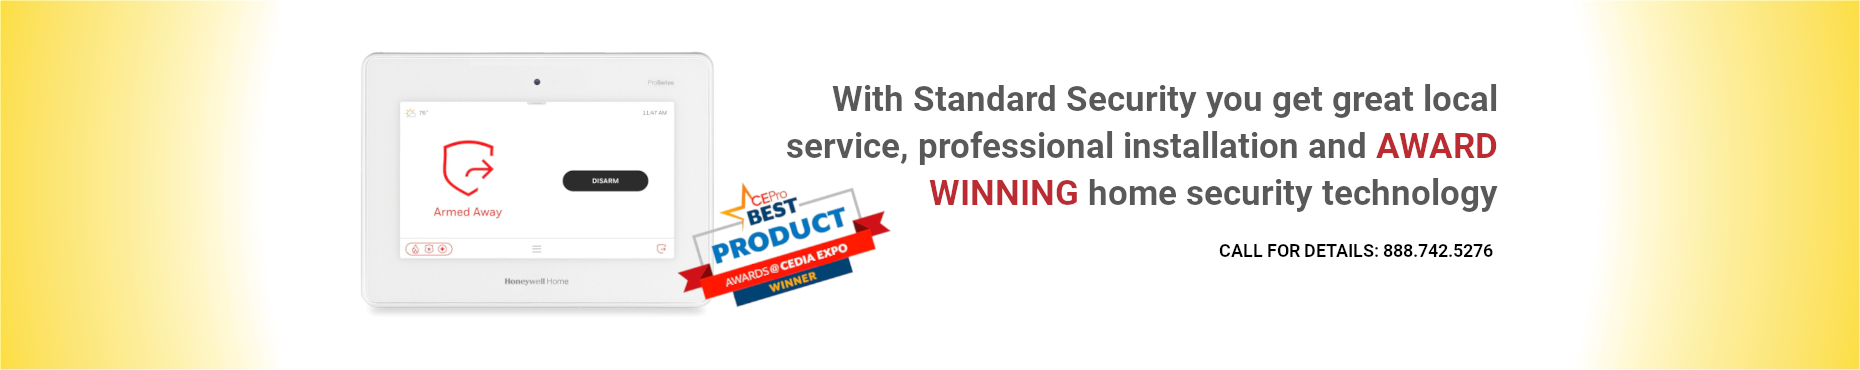 Choose Standard Security Systems a local company you can trust.